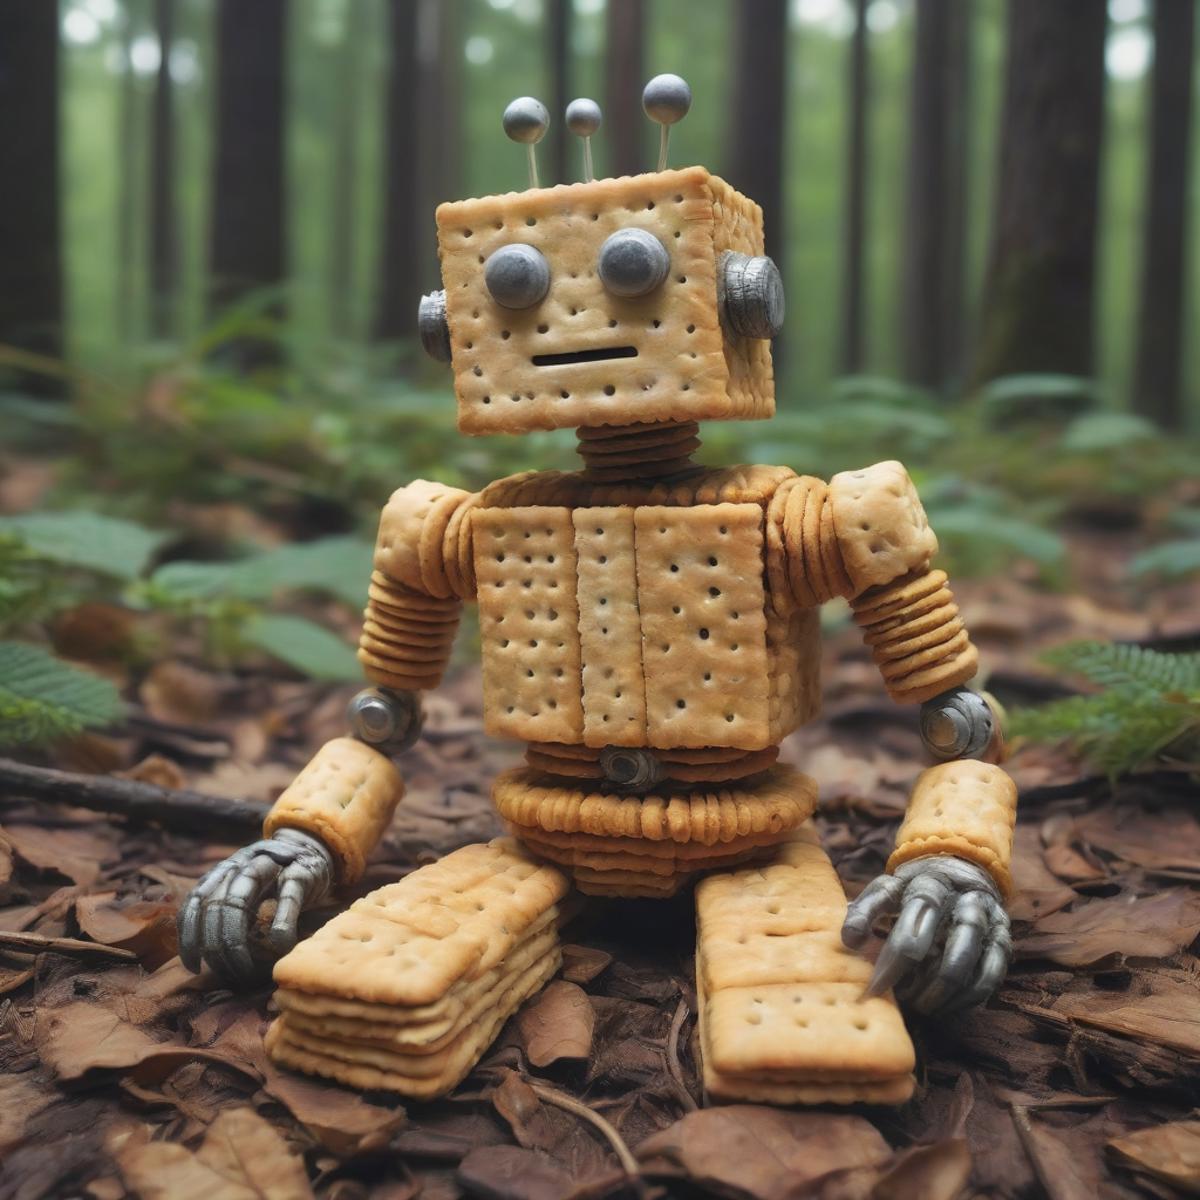 A robot made of Oreos and cookies sitting on a pile of leaves in the woods.